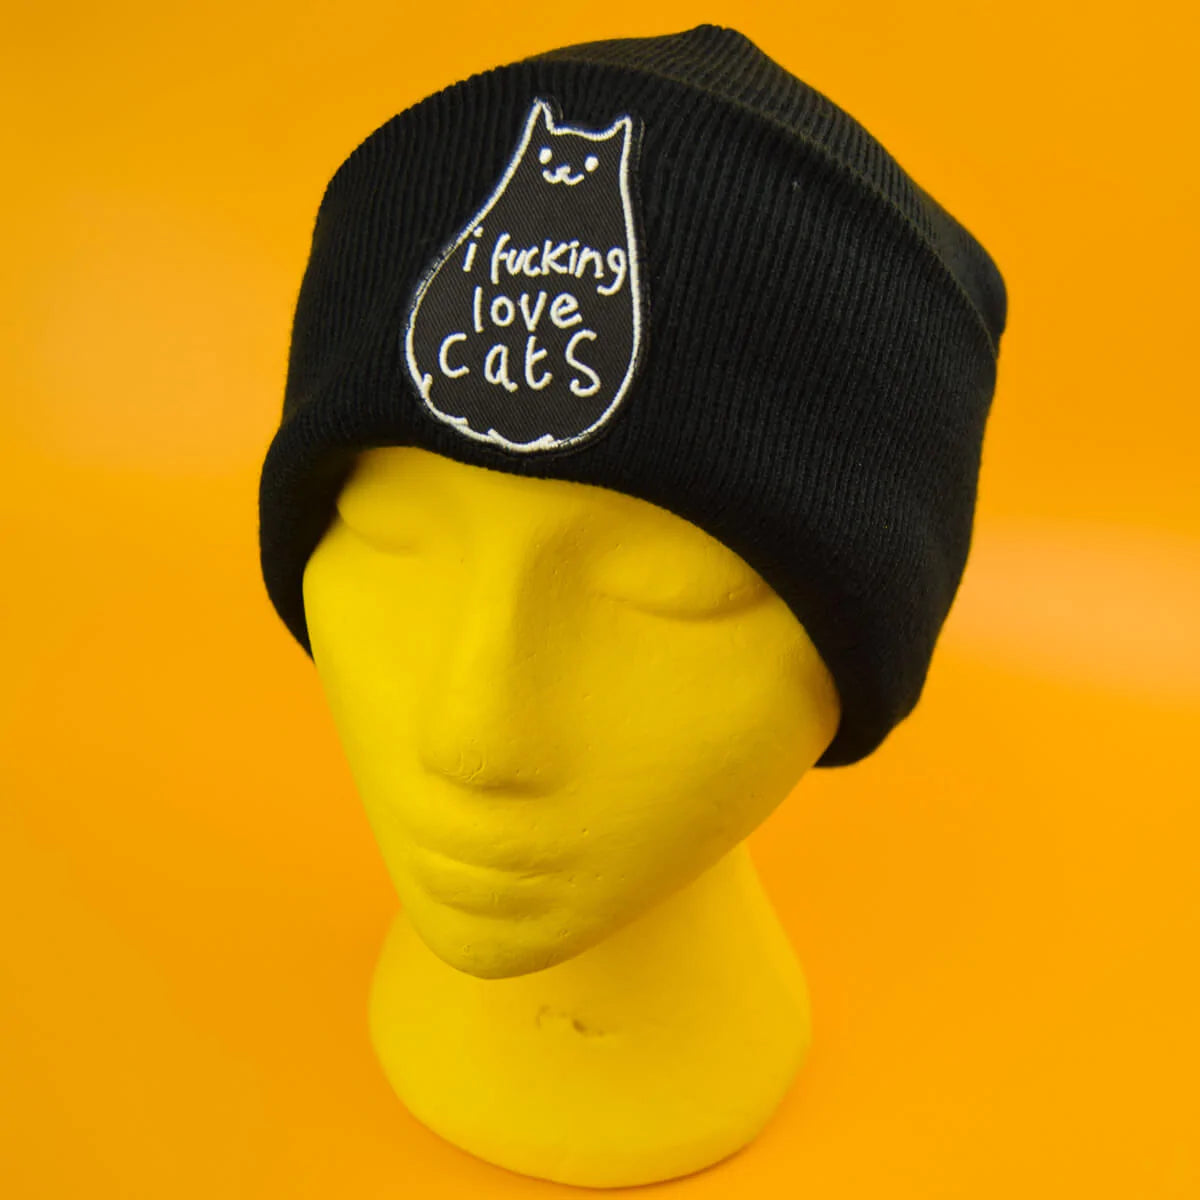 I FUCKING LOVE CATS PATCH BLACK BEANIE